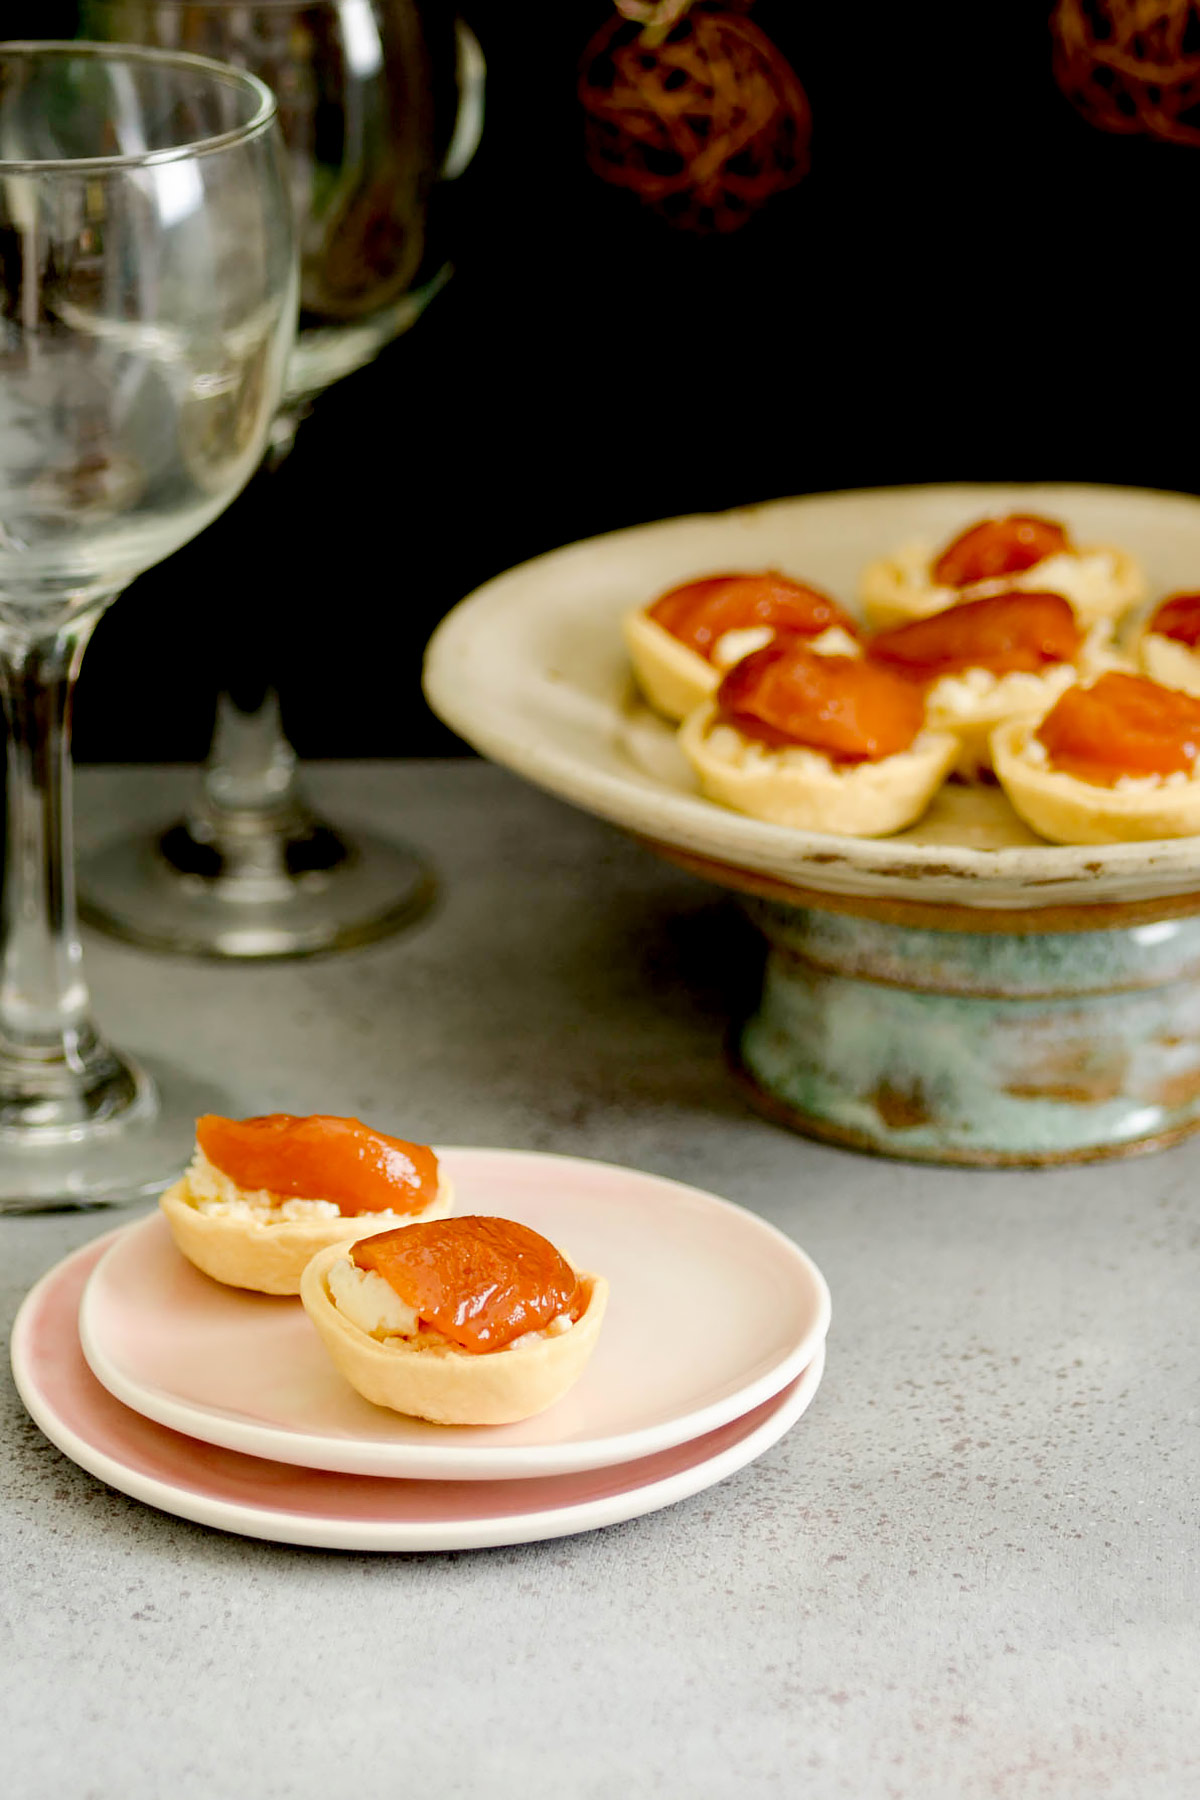 Mini tart shells filled with cheese and fruit.